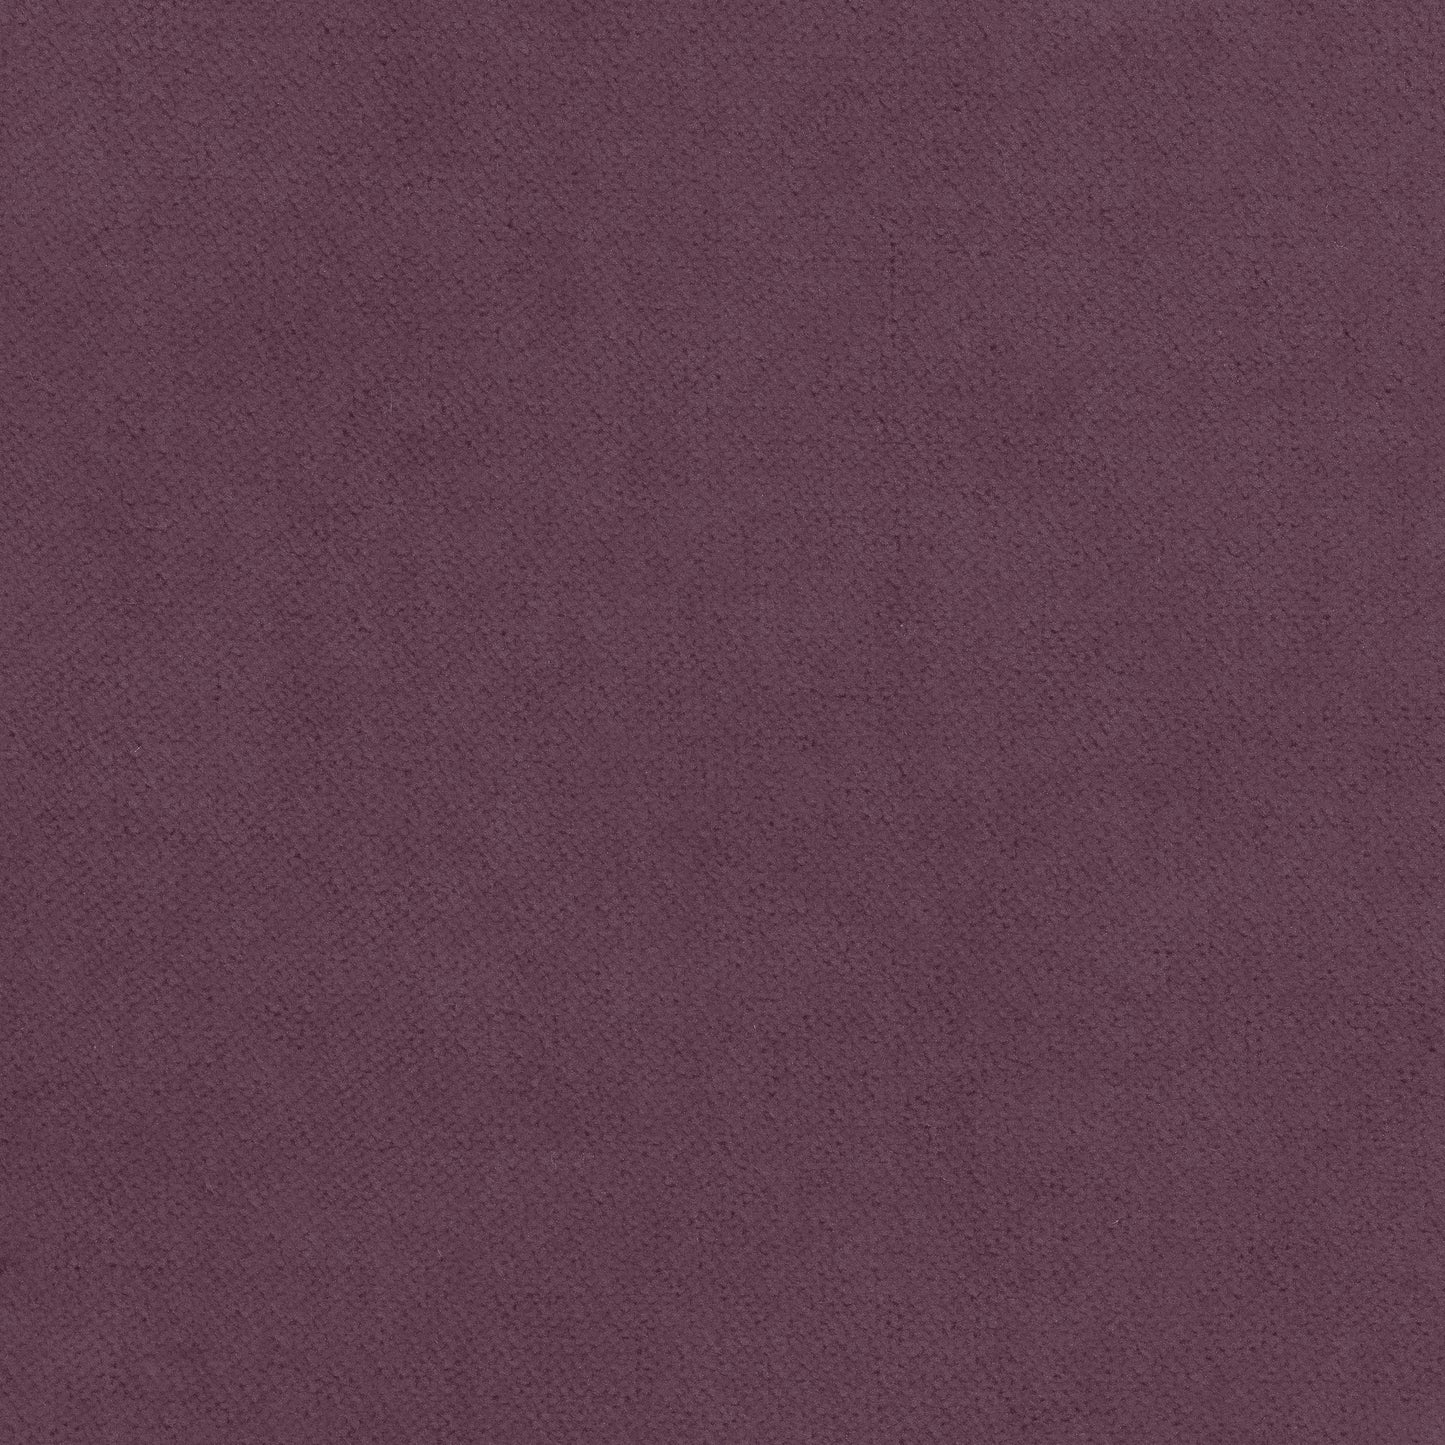 Purchase Thibaut Fabric Product W7213 pattern name Club Velvet color Mulberry